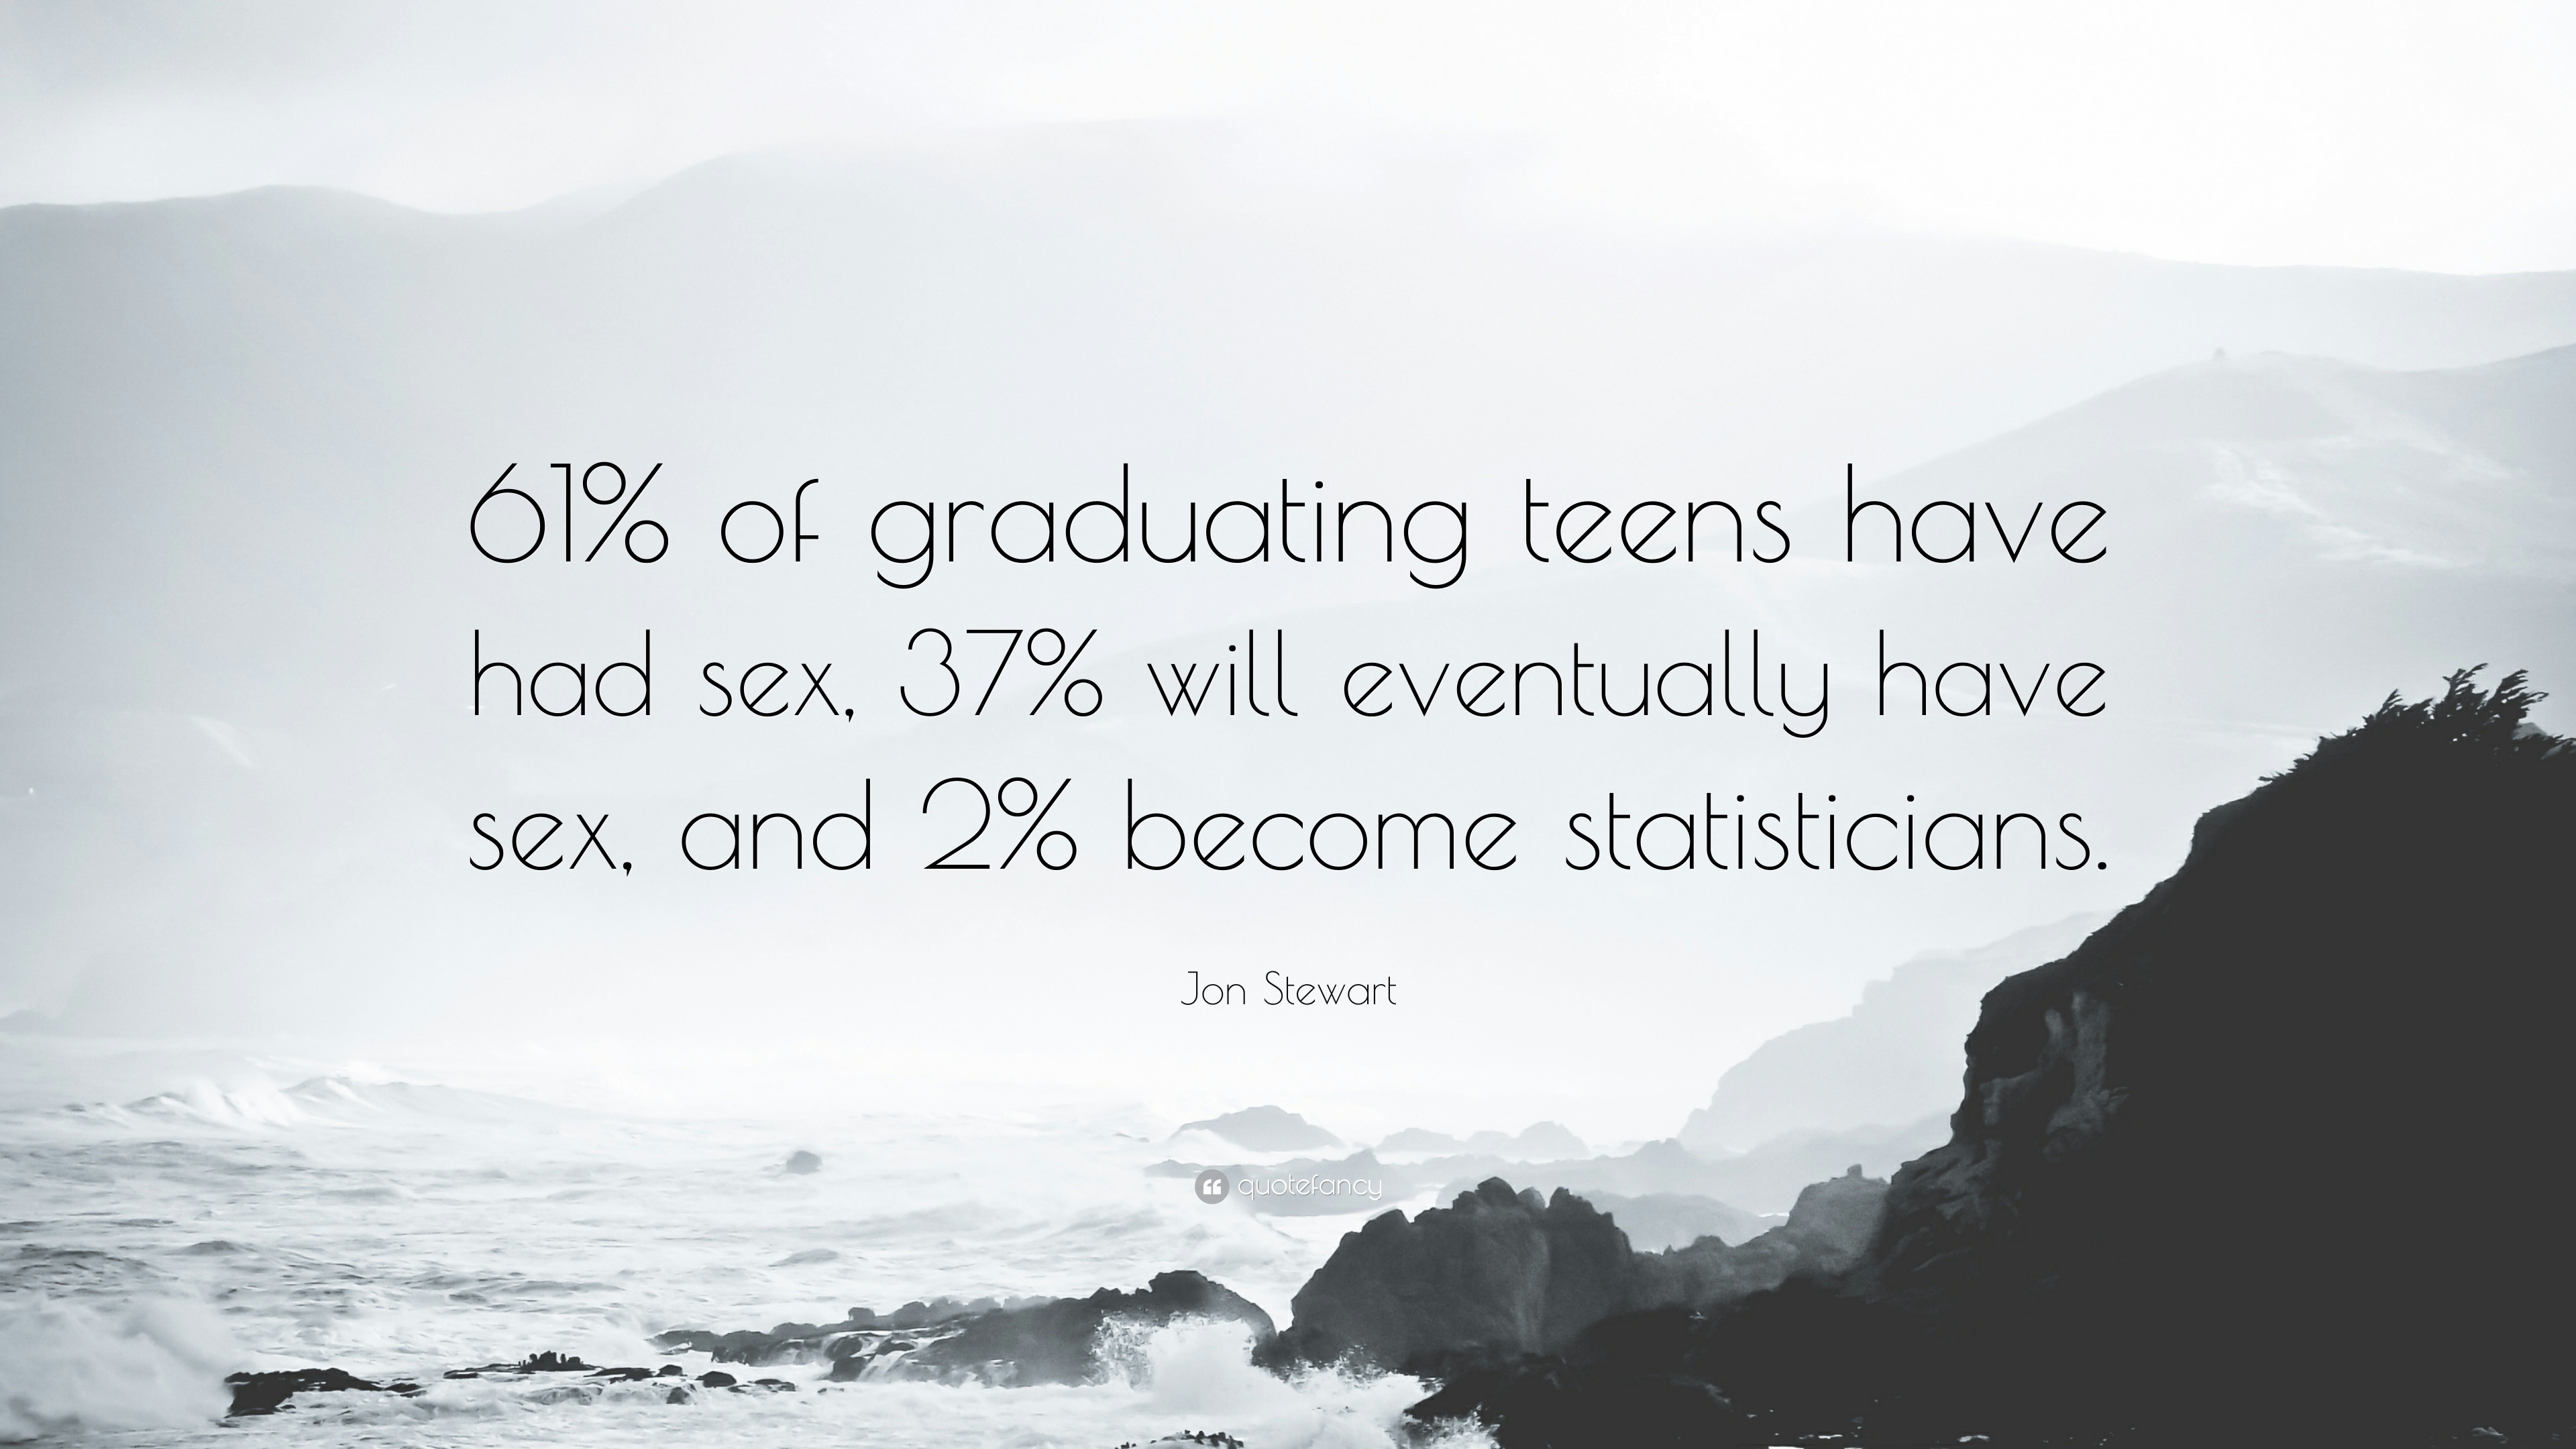 Jon Stewart Quote “61% of graduating teens have had sex, 37% will eventually have pic photo